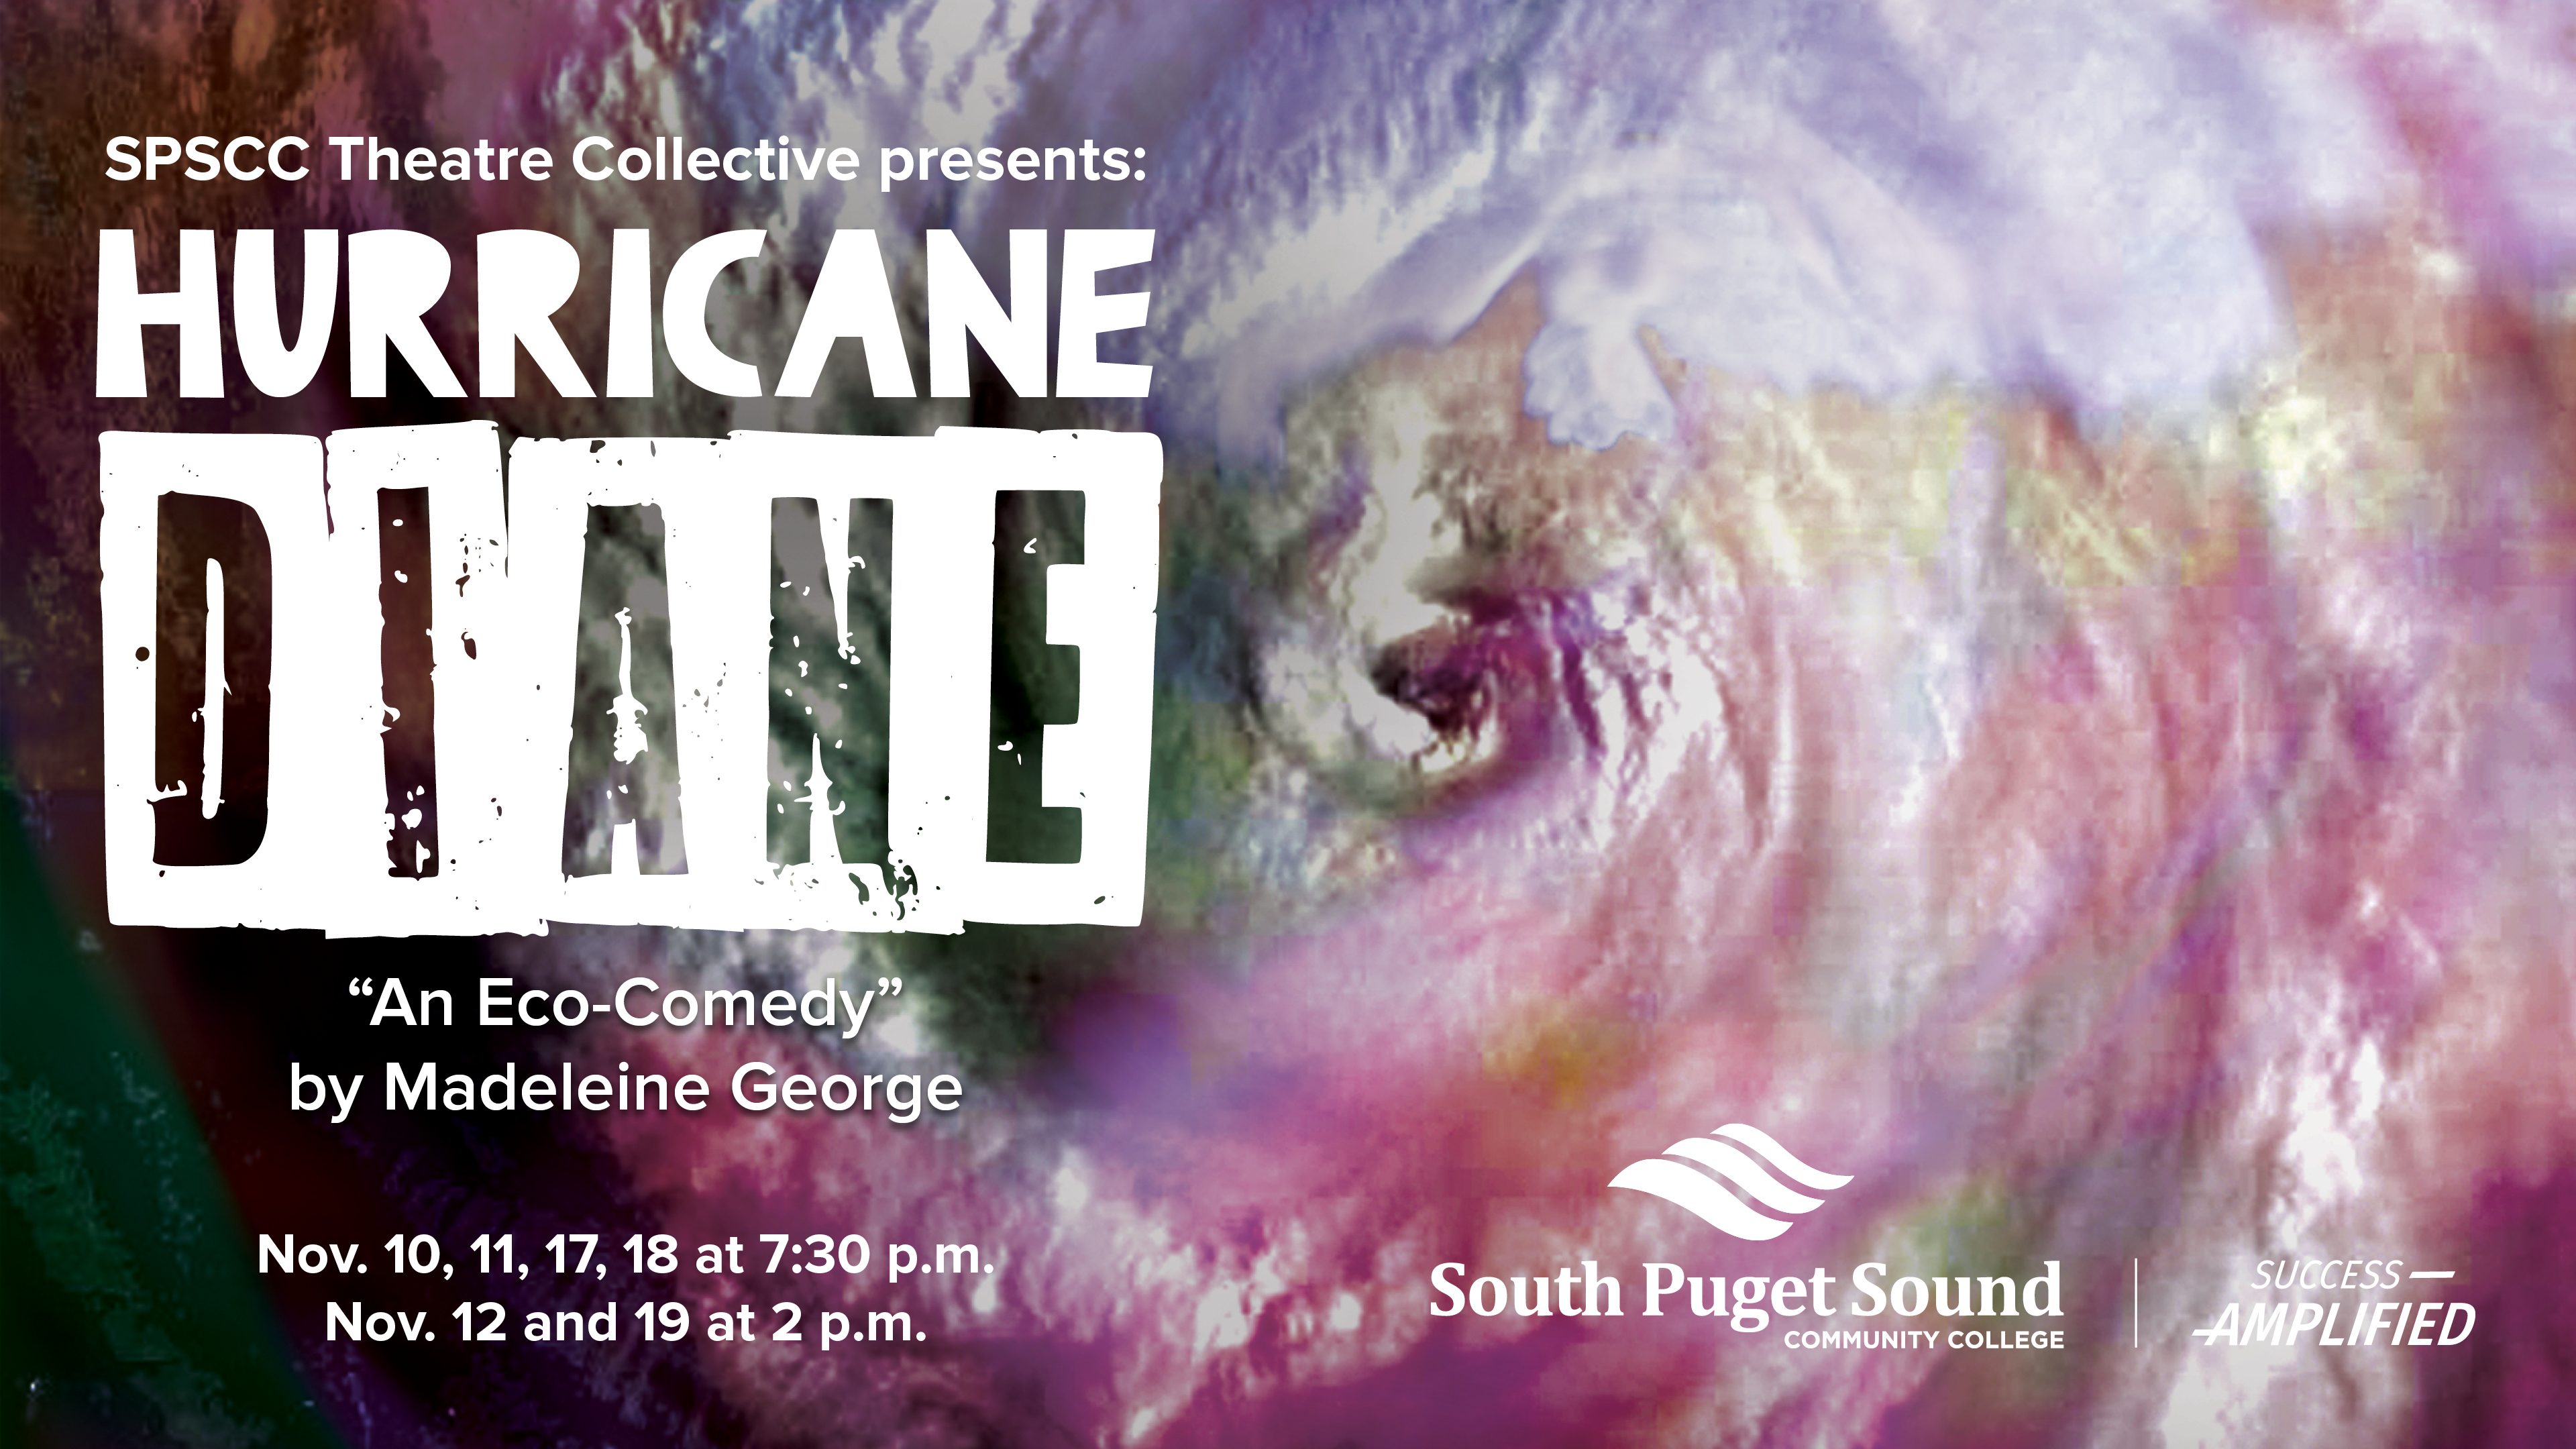 SPSCC Theatre Collective presents Hurricane Diane "An Eco-Comedy" by Madeleine George. Nov. 10, 11, 17, 18 at 7:30 p.m. Nov. 12 and 19 at 2 p.m.